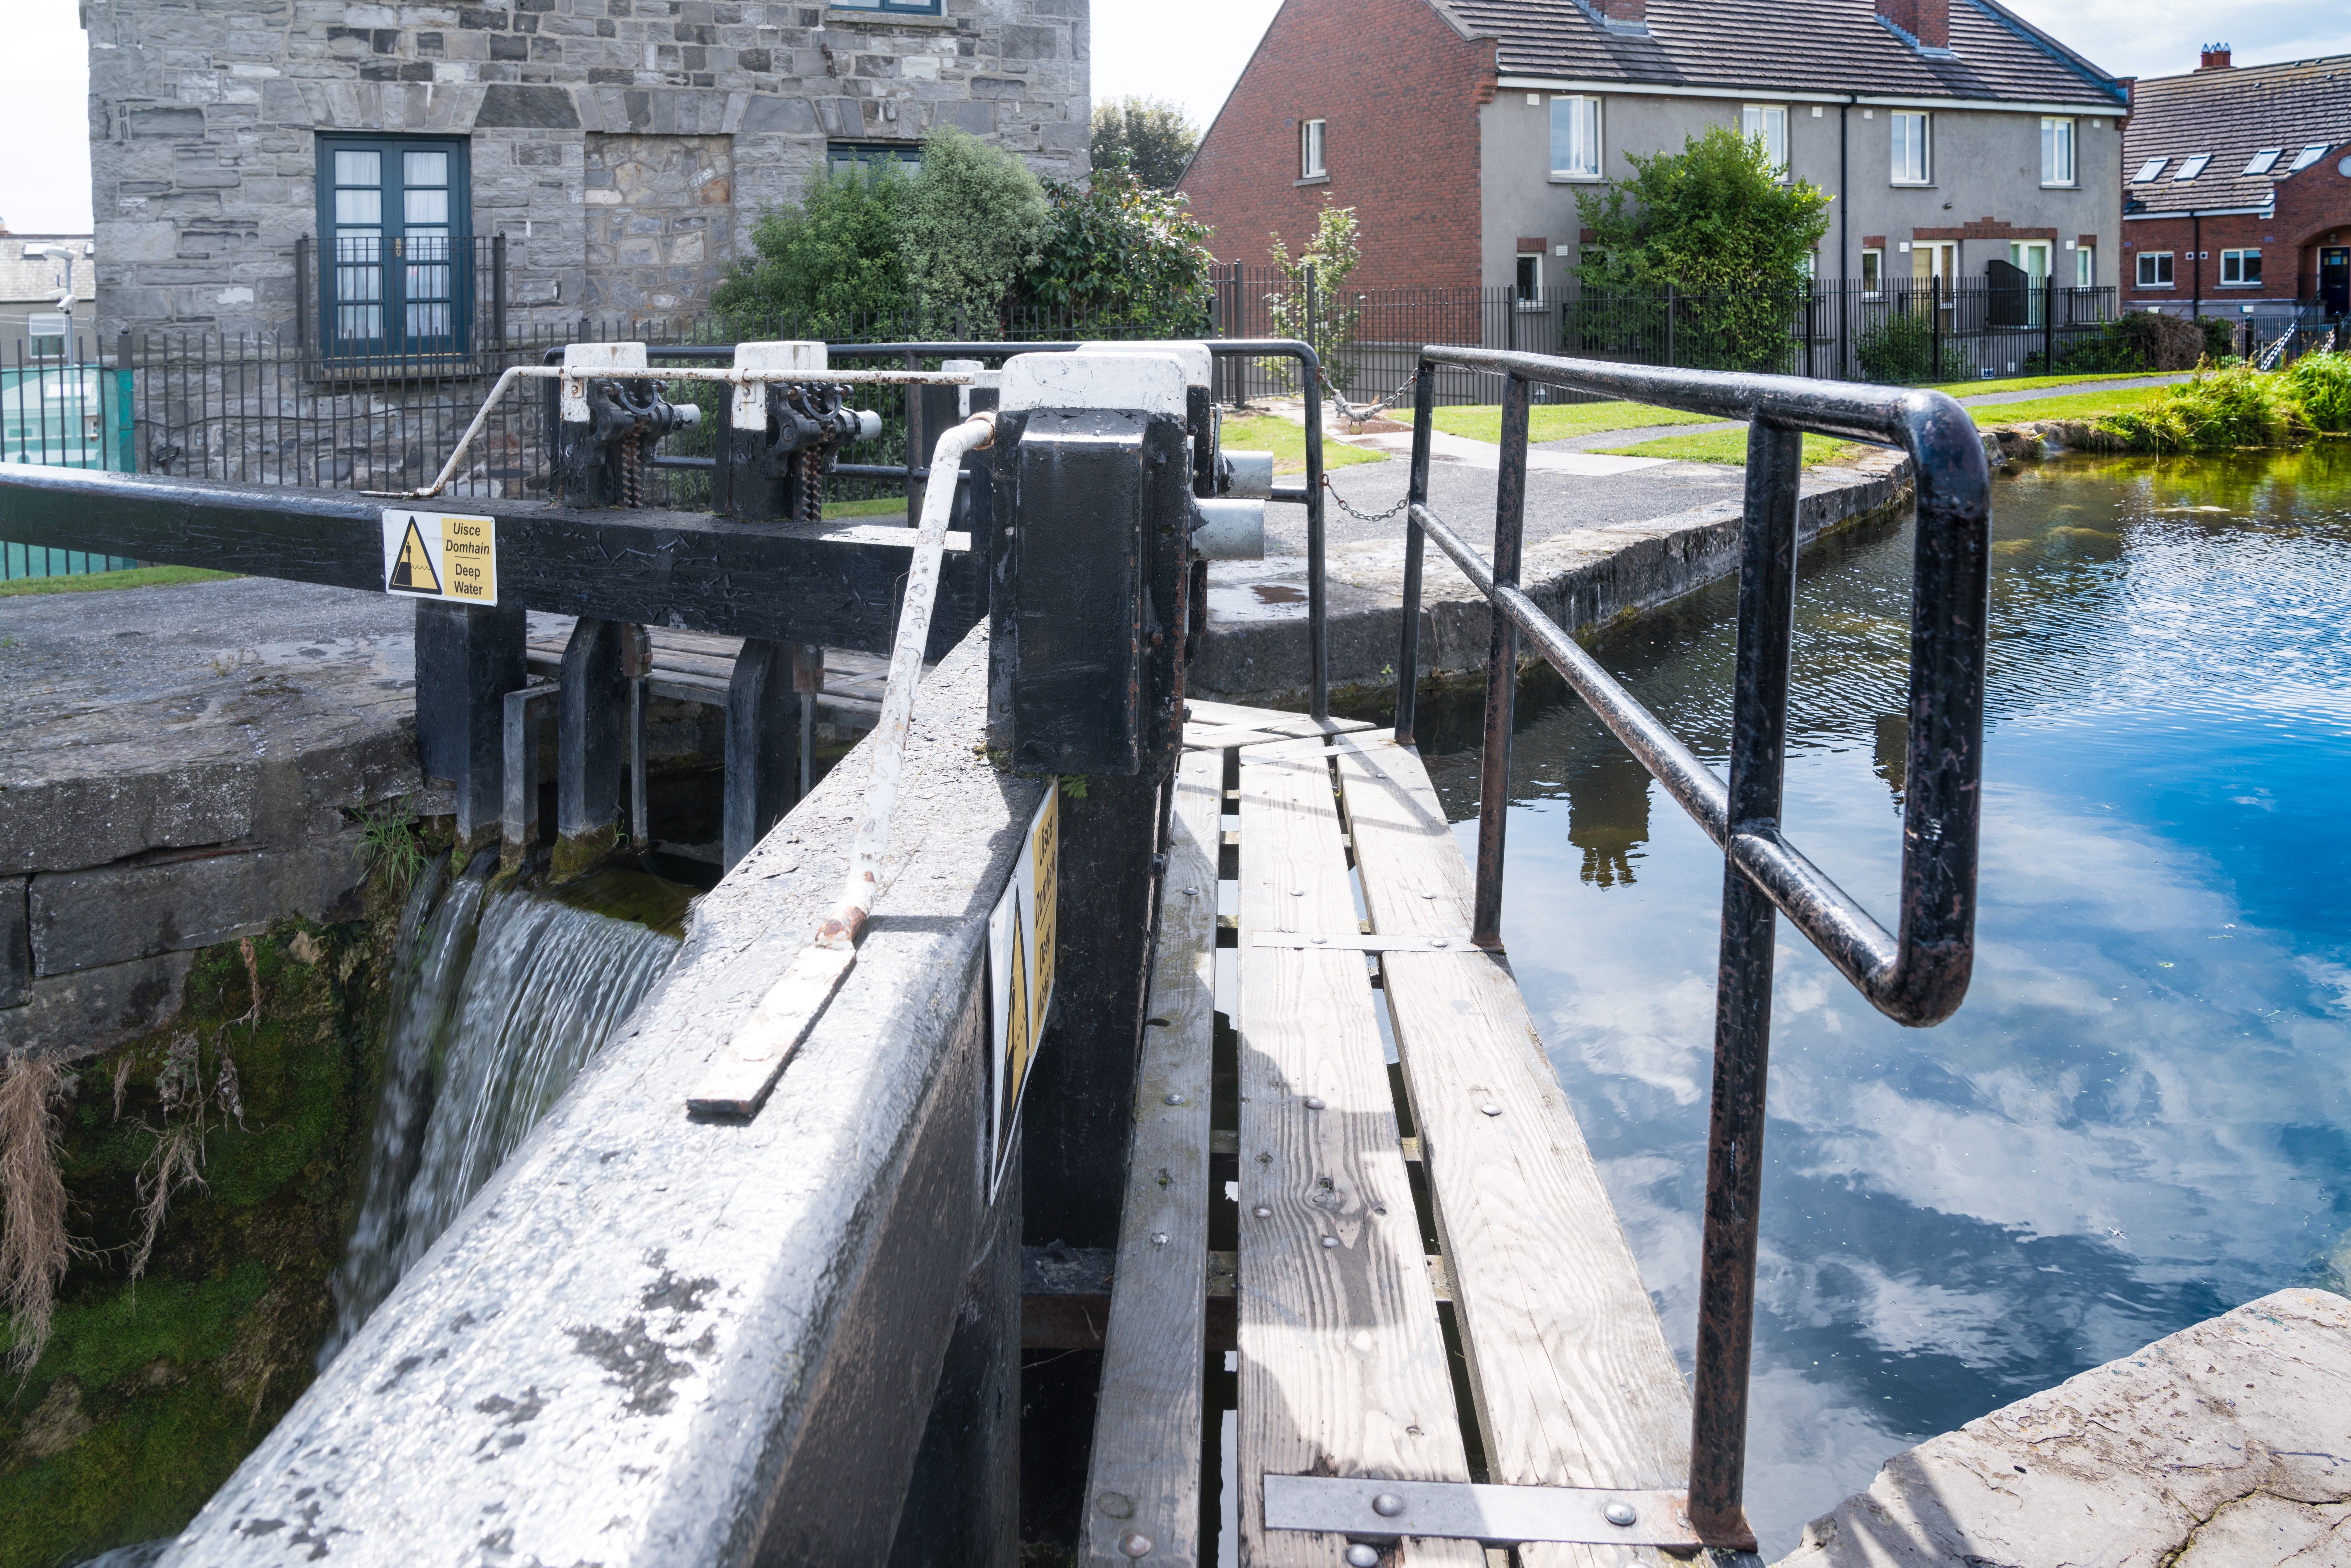  ROYAL CANAL - CABRA AREA 014 